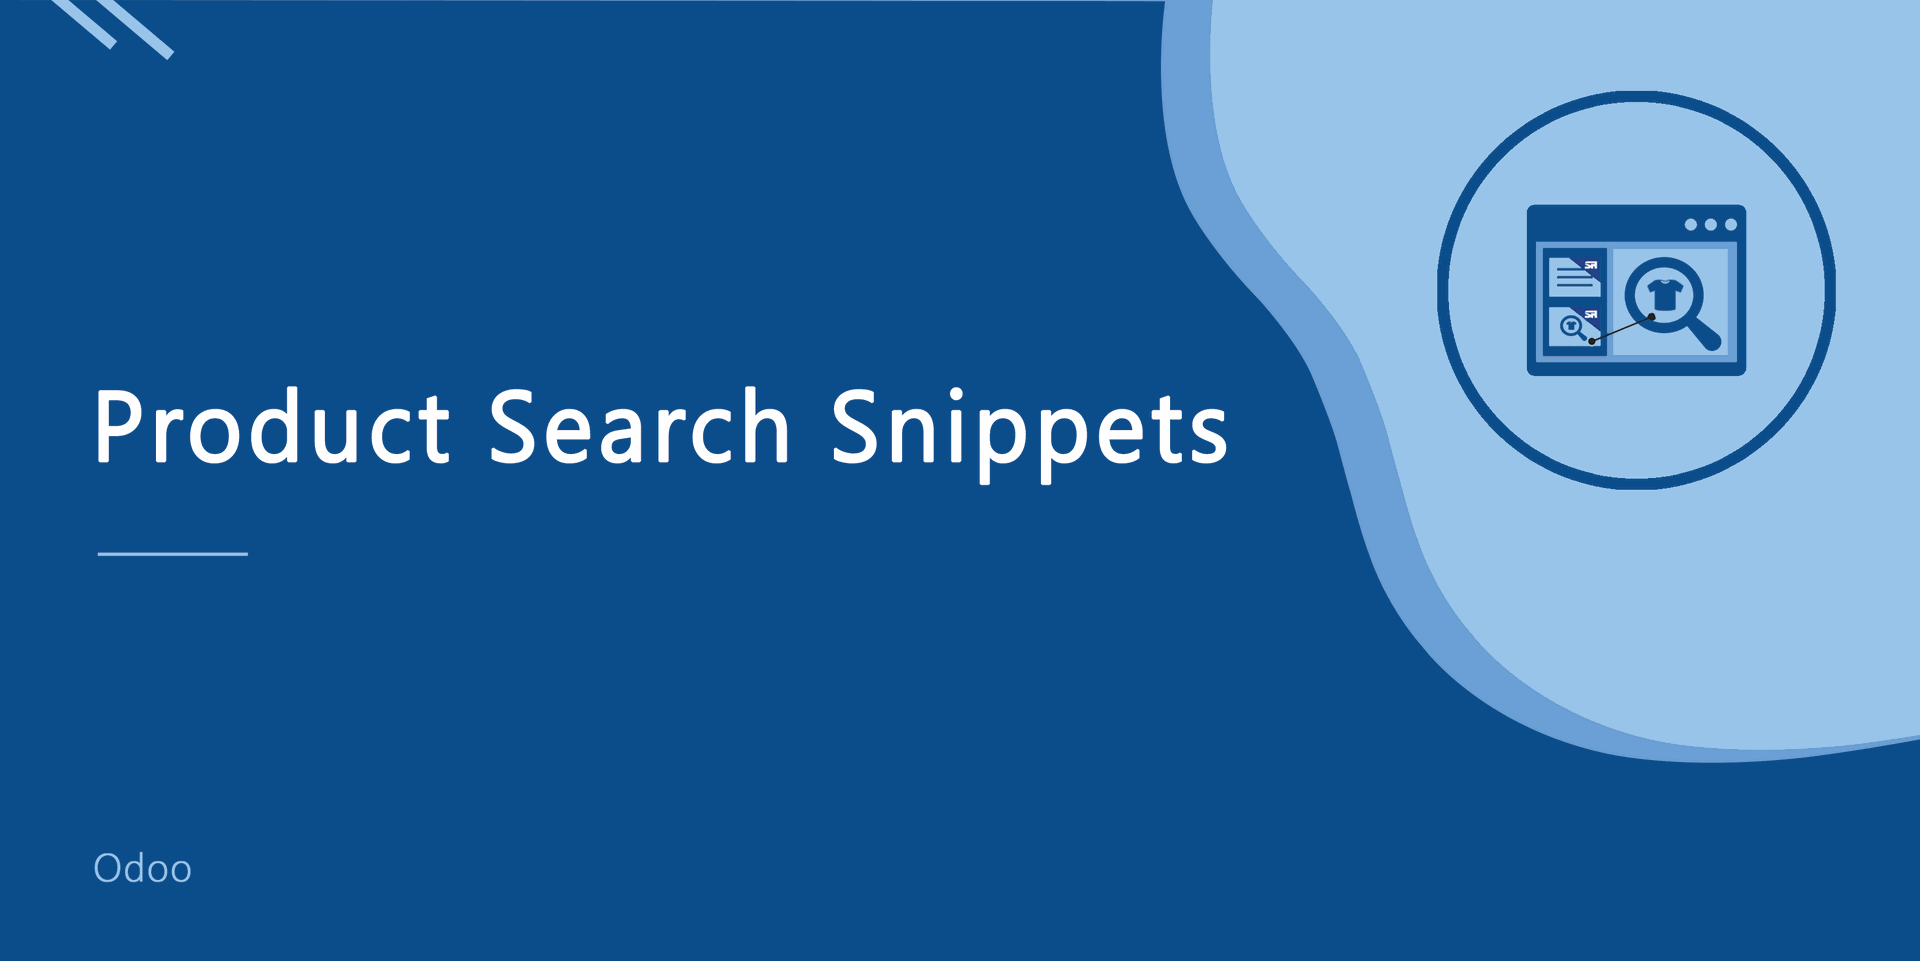 Product Search Snippet